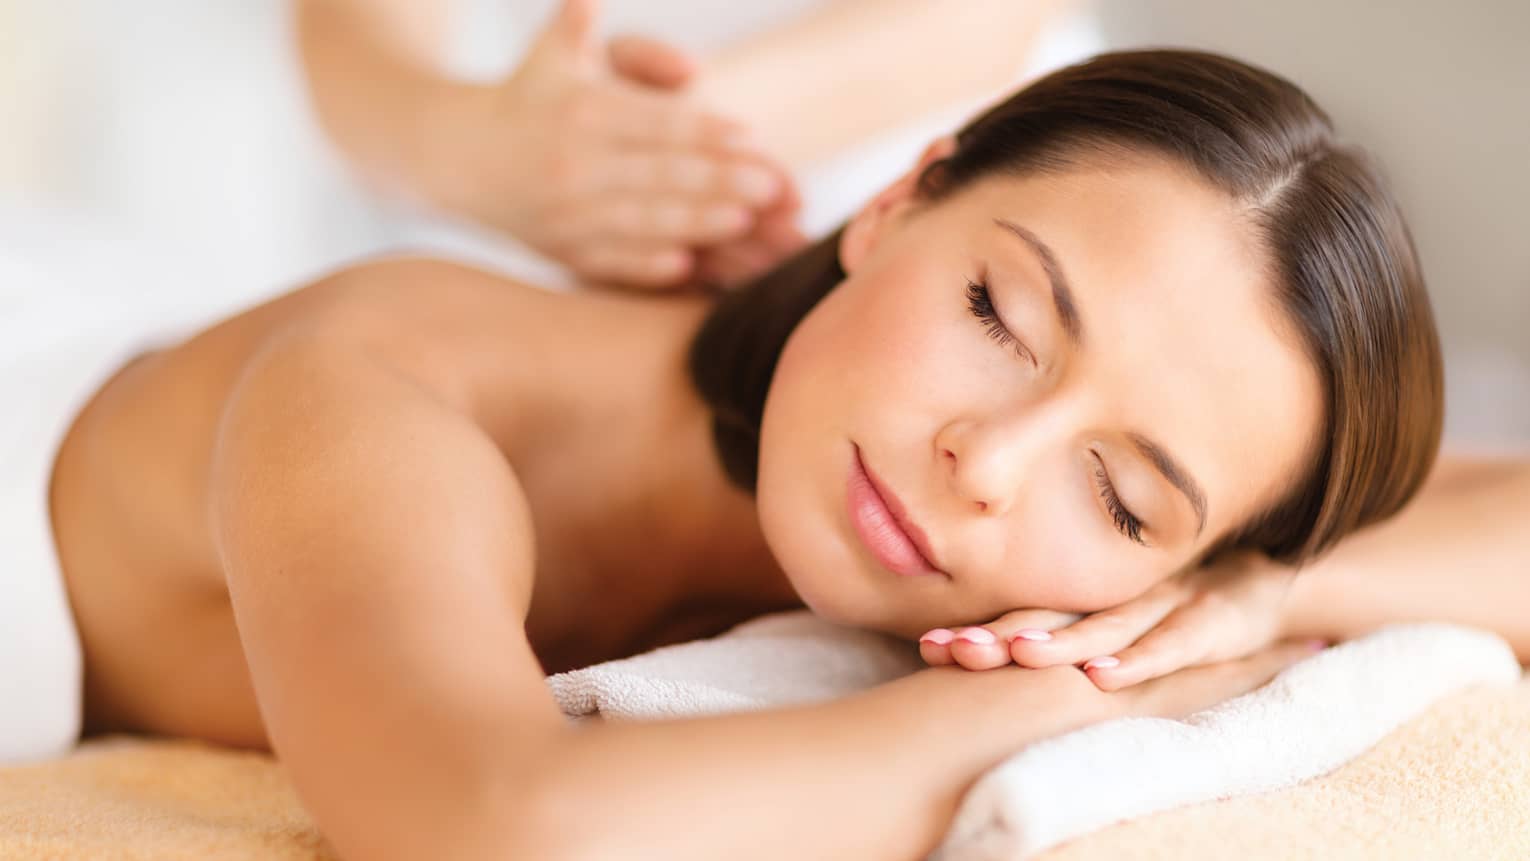 Woman lies on massage table, closes eyes. rests head on arms as spa staff massages back